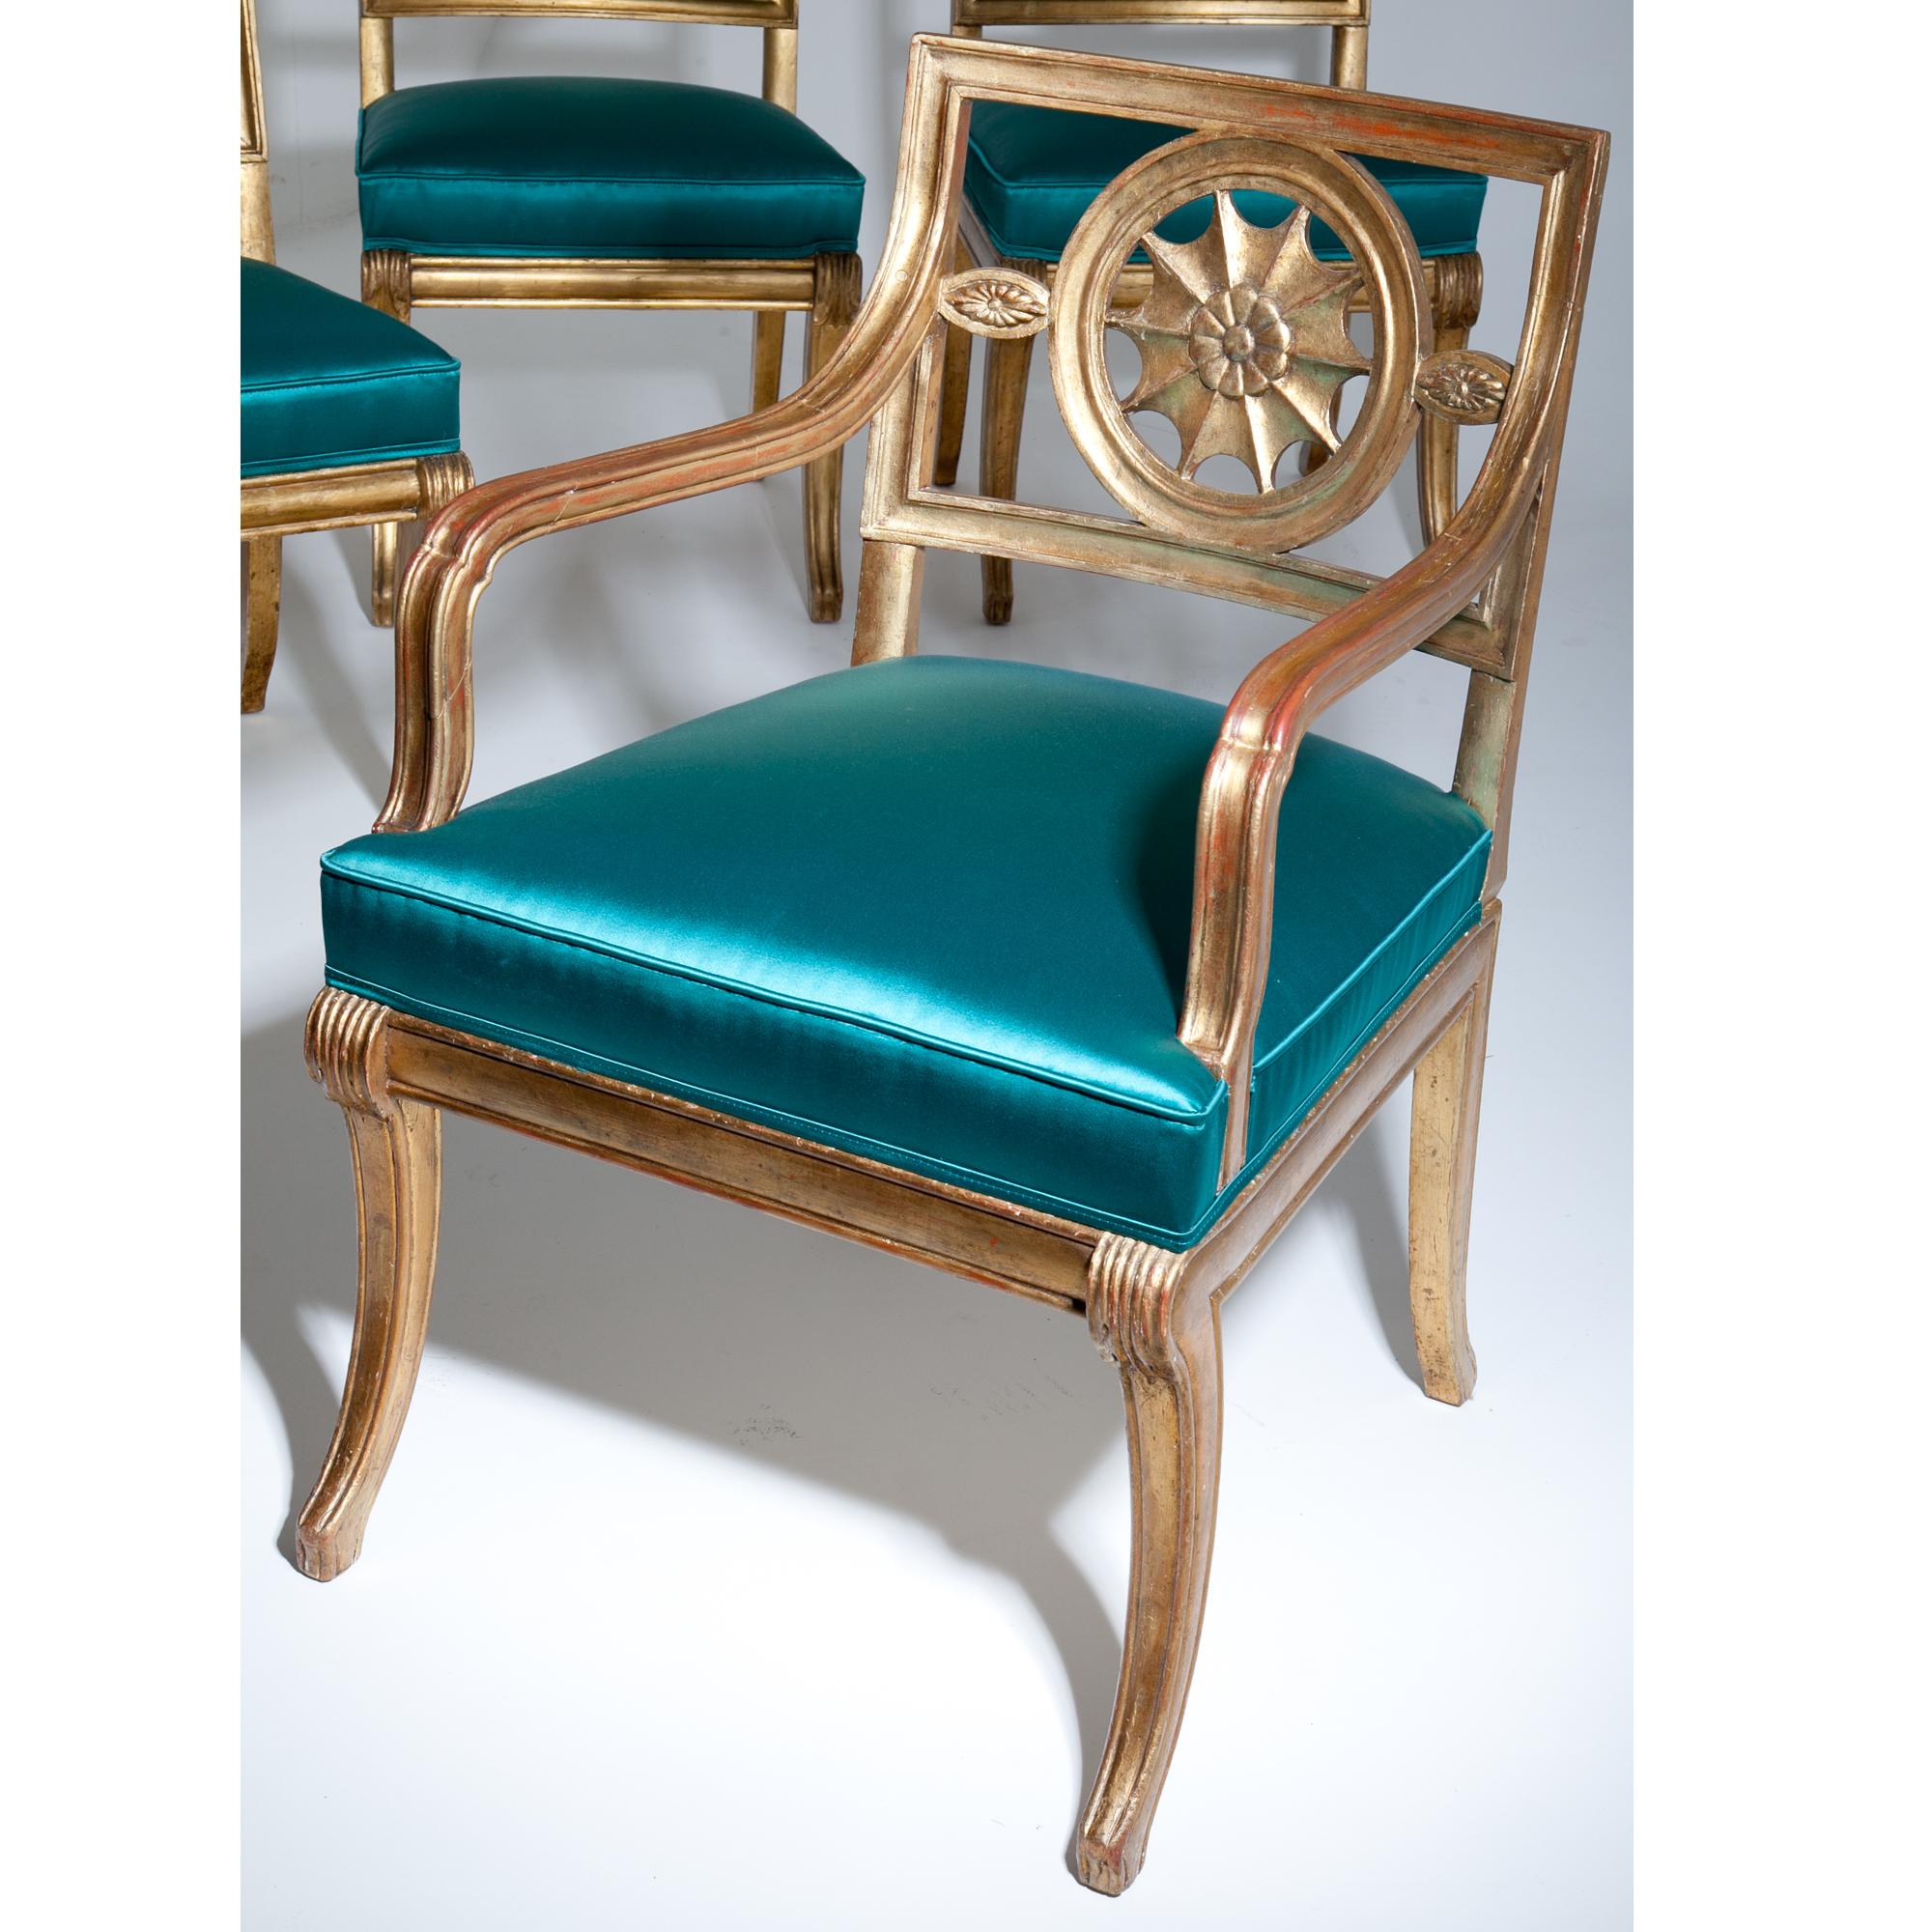 Neoclassical Chairs, Berlin First Half of the 19th Century 10